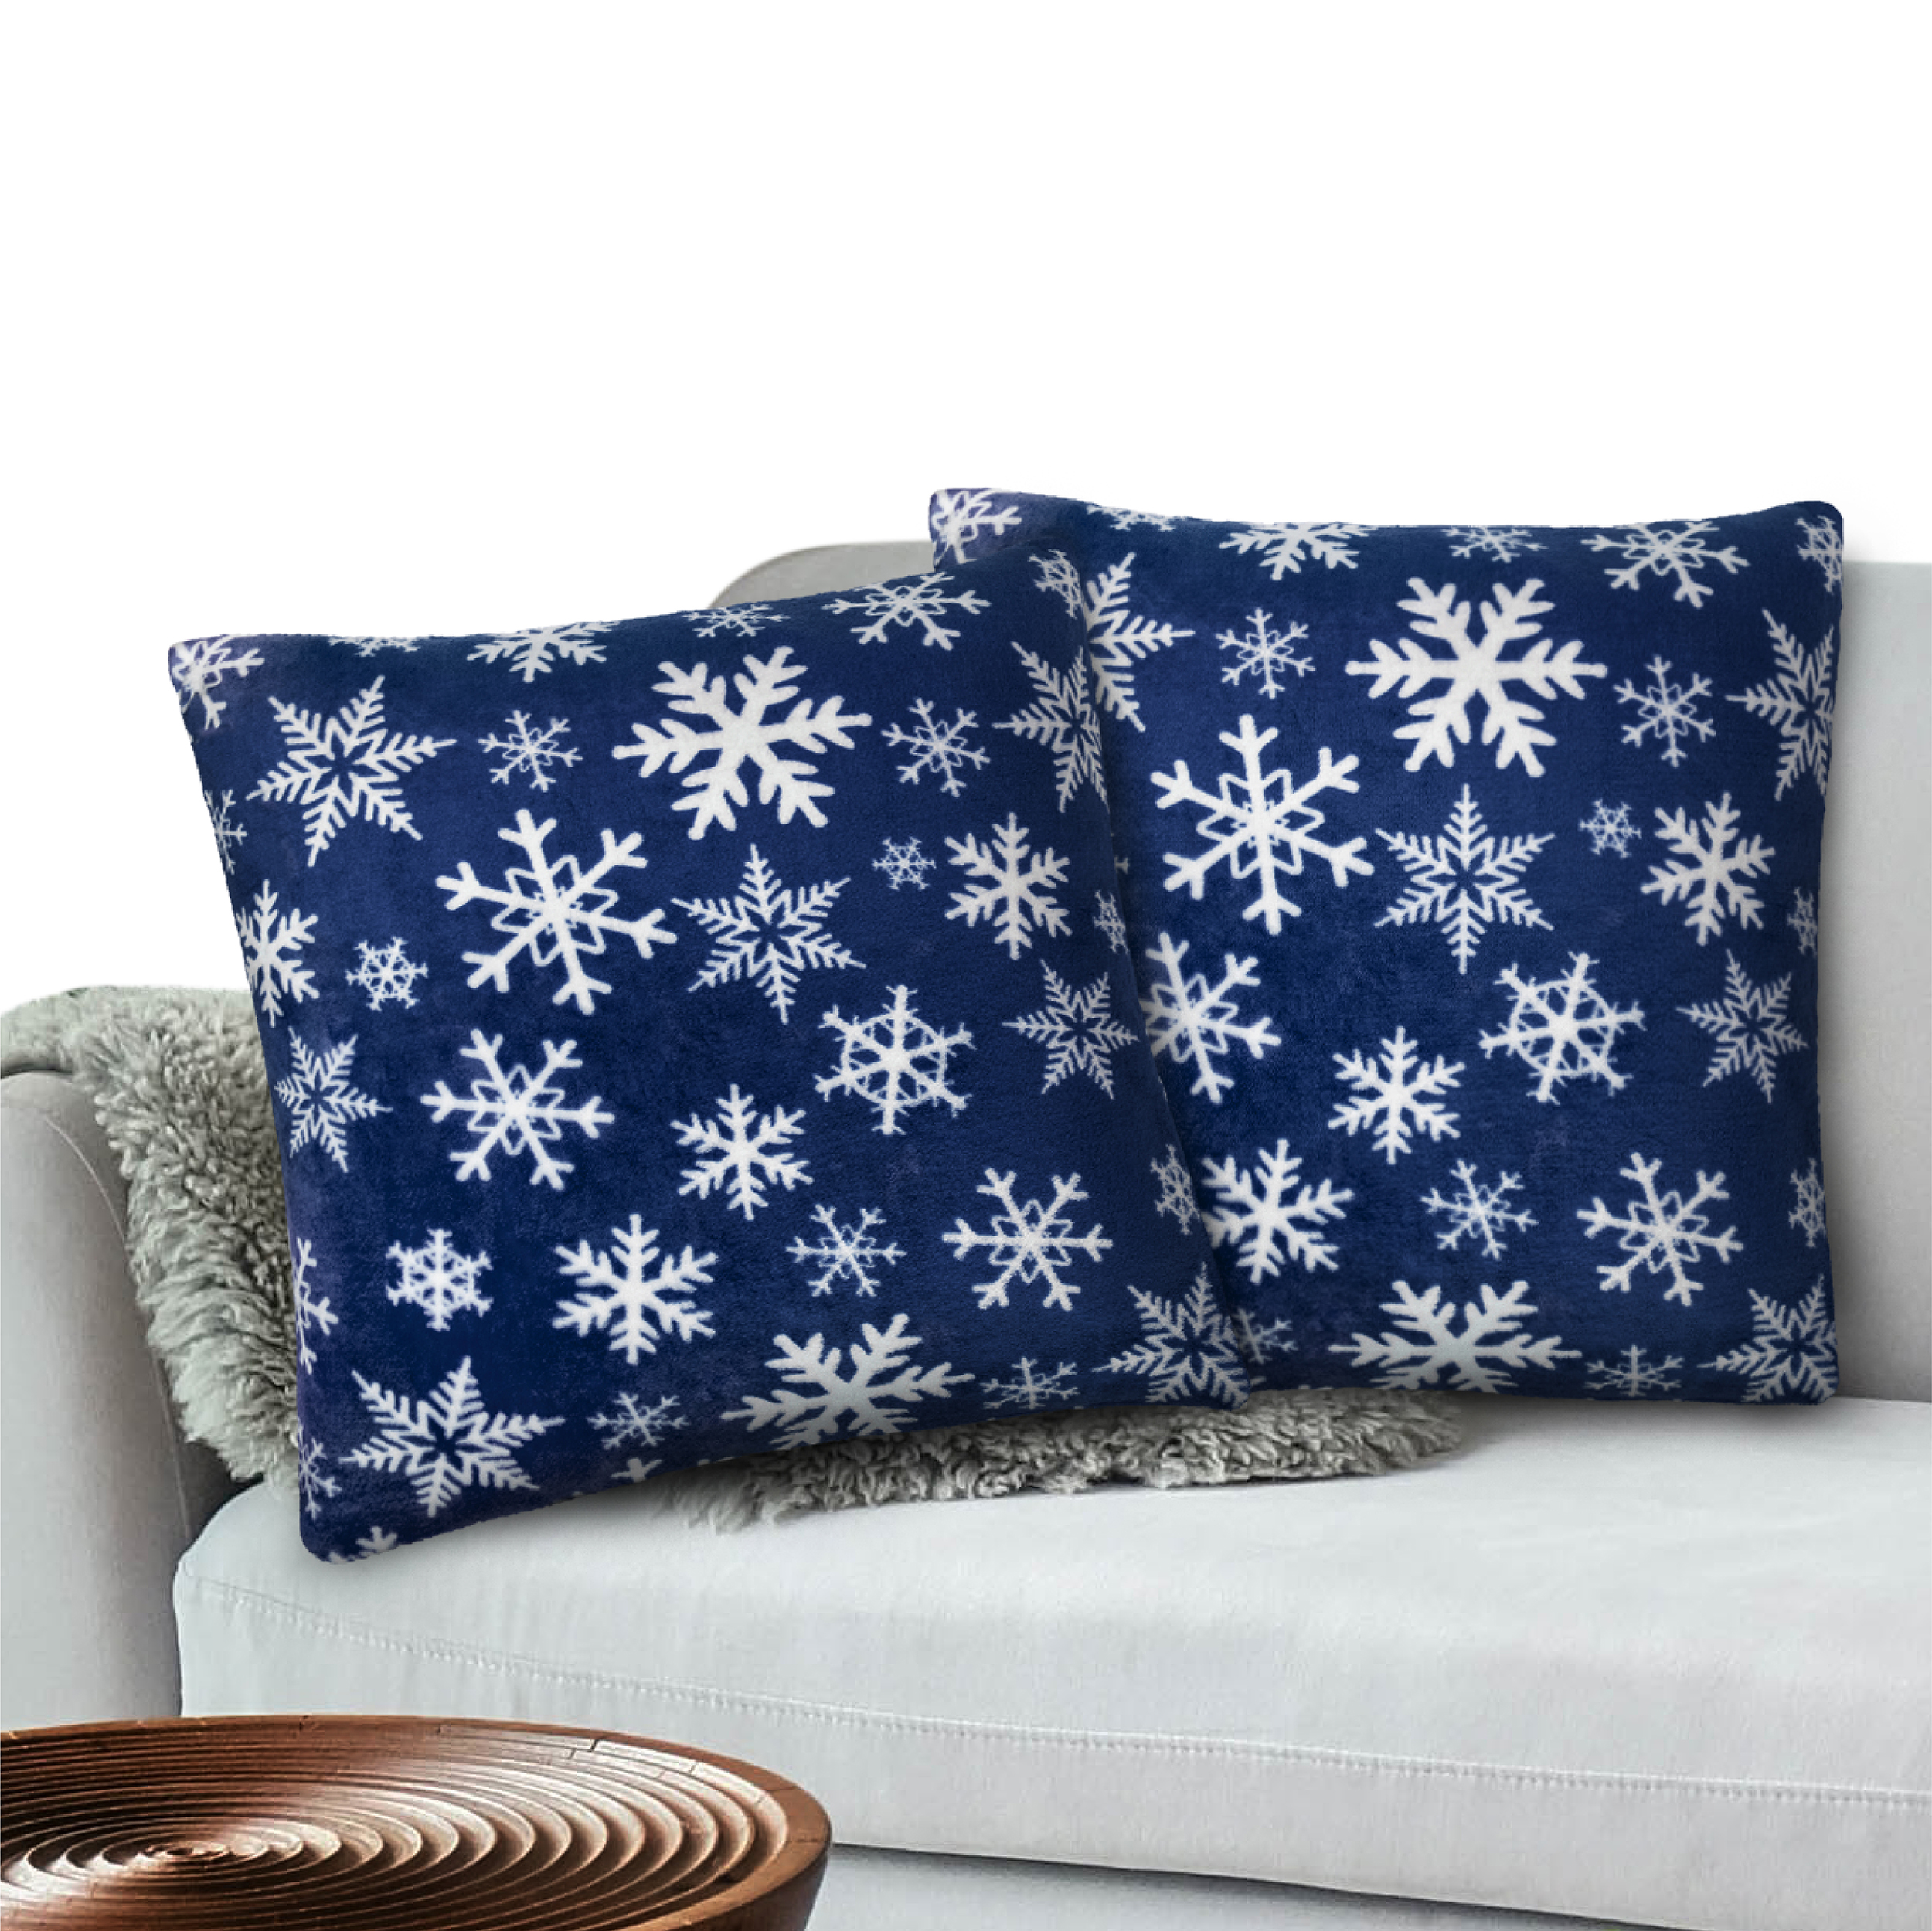 Christmas Velvet Embroidered Decorative Holiday Series Throw Pillow with  inserts, Blue and Gray, 18 x 18, Set of 4